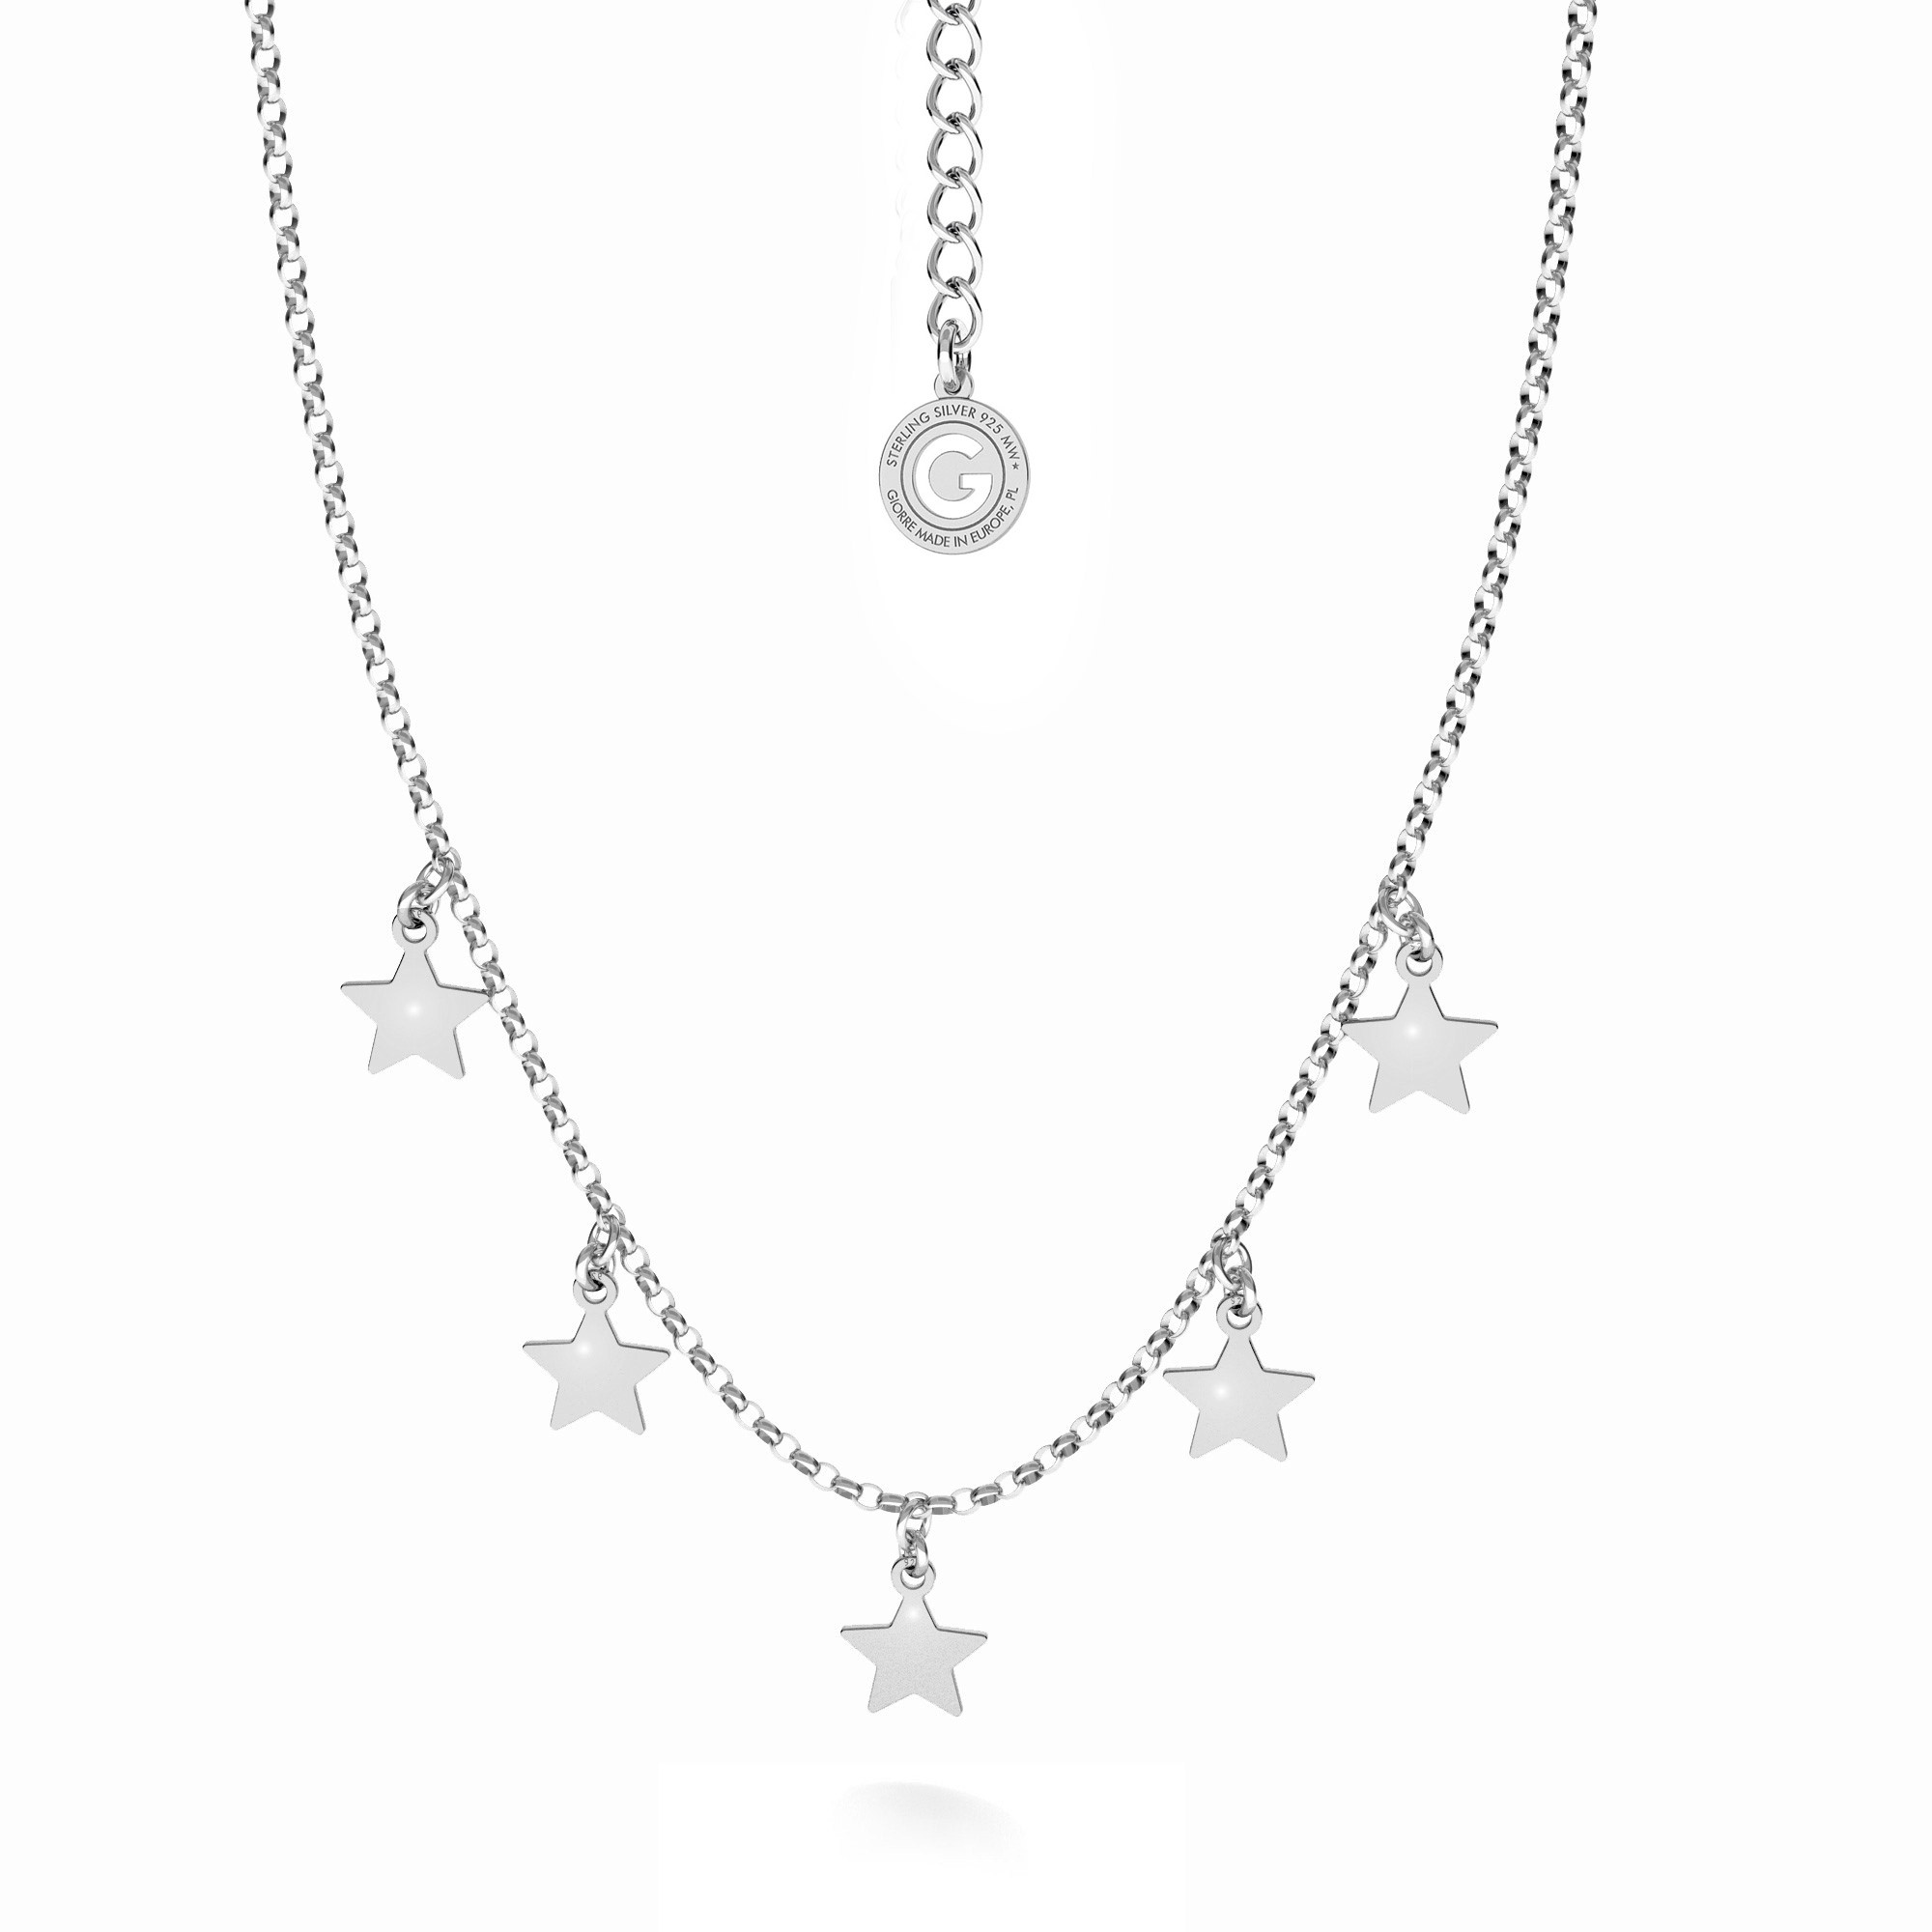 Silver star necklace T°ra'vel'' , silver 925